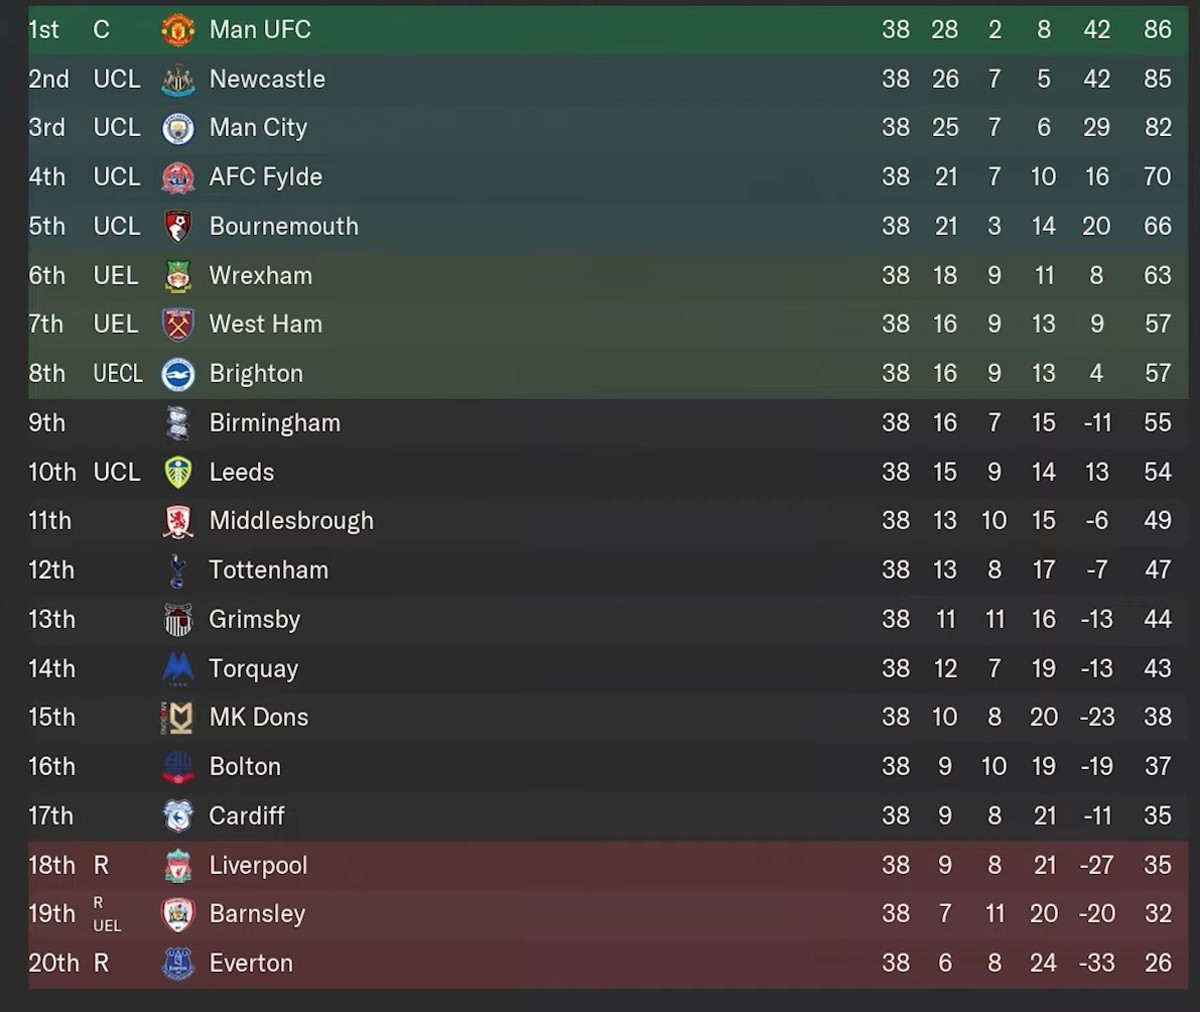 This is what the Premier League table could look like in 2124 based on a 100-year Football Manager 2024 simulation